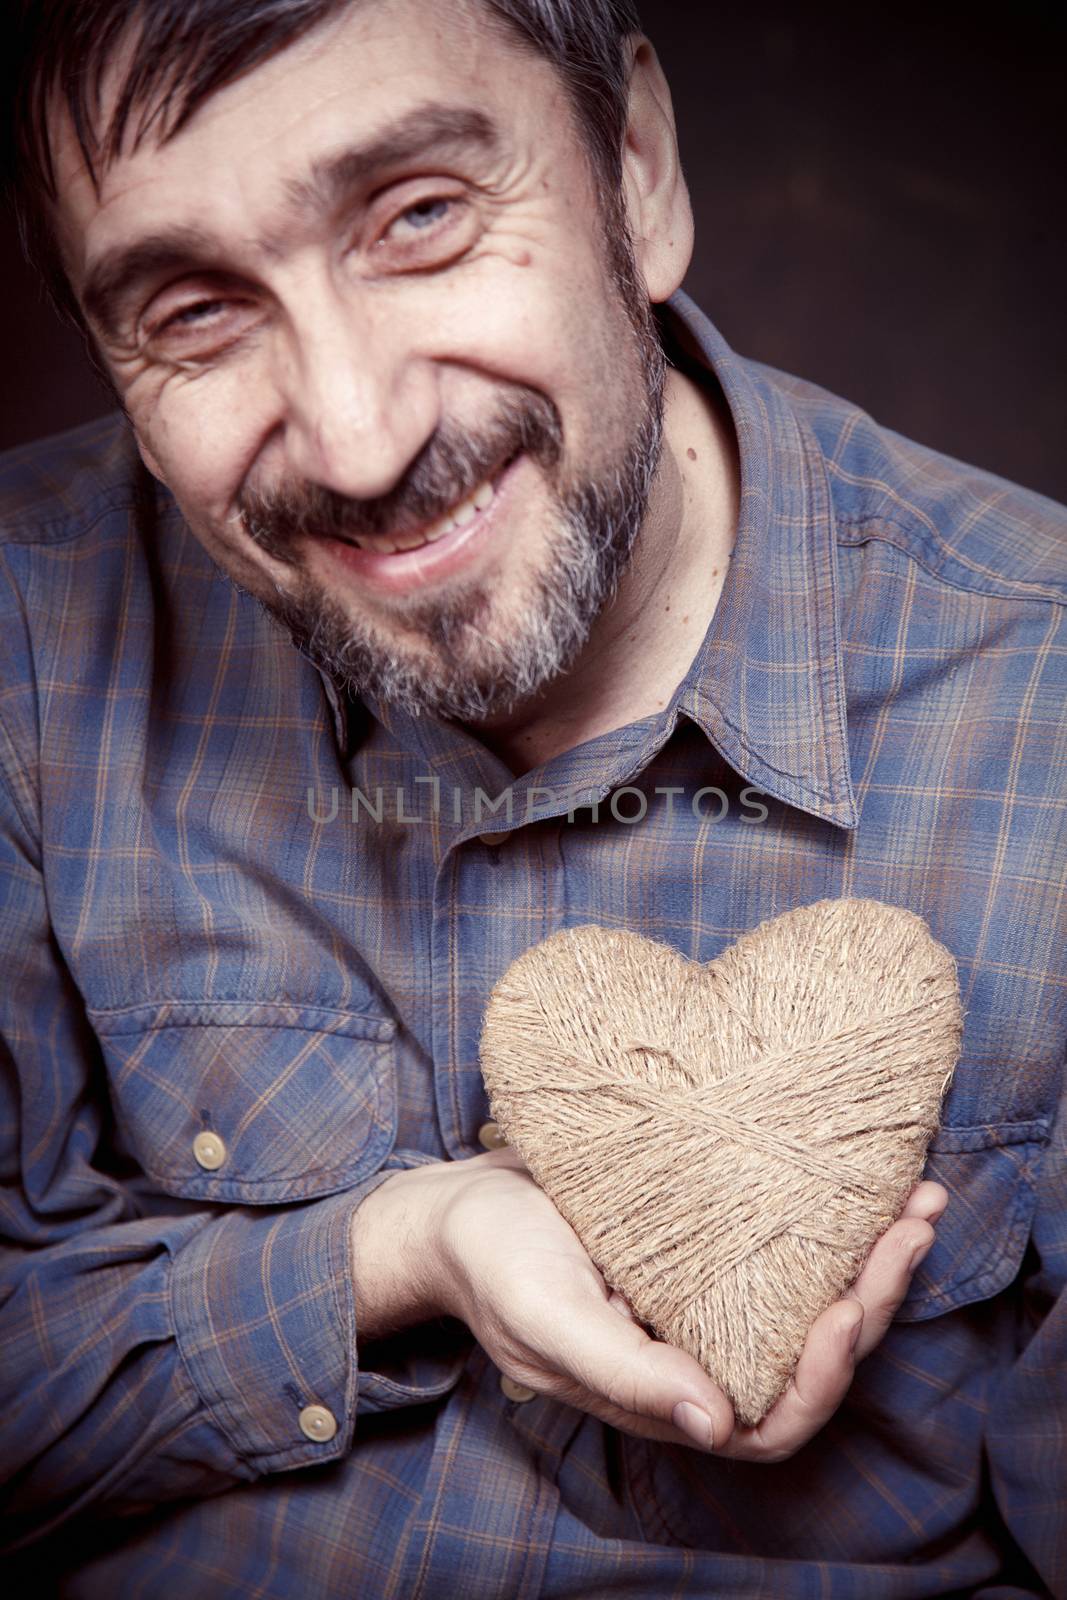 Man holding heart in his hands by anelina